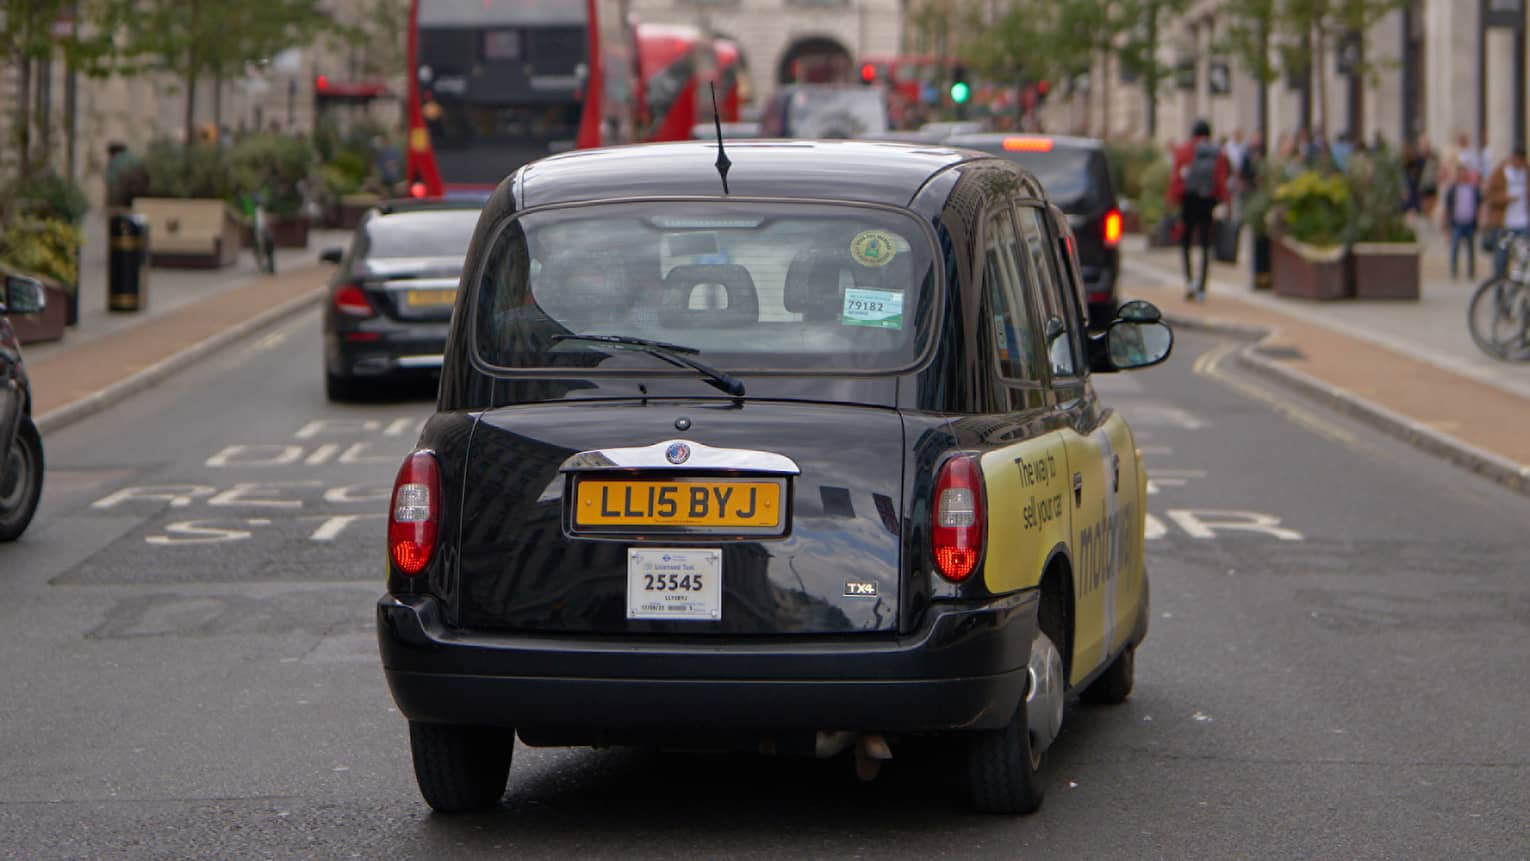 Rear view of London-style black cab, double-decker buses and other cars on road strung across with rows of Union Jack flags.